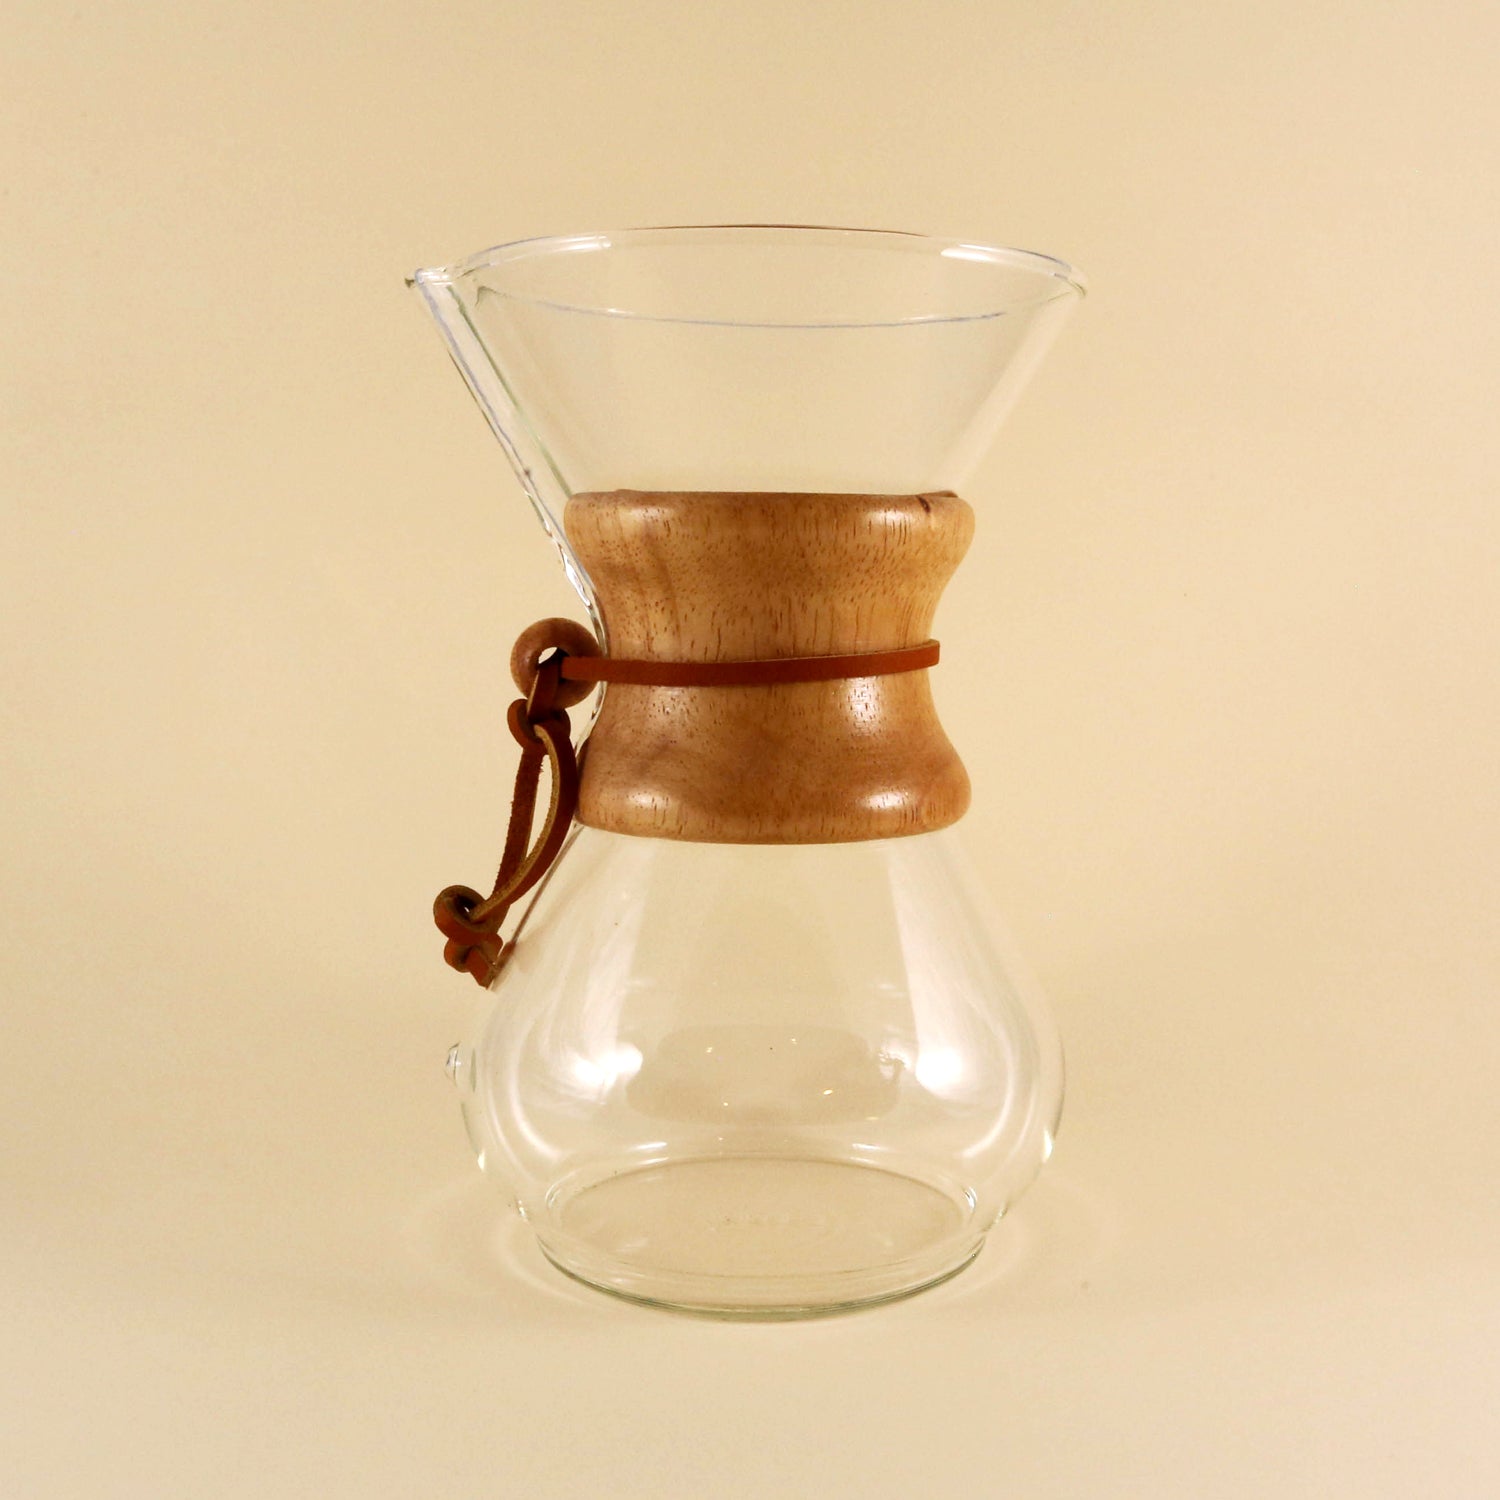 Tandem Coffee Roasters' Chemex 6 Cup Brewer, a clear glass coffee maker with a reusable filter, conical top, and bulbous bottom, featuring a wooden collar and leather tie against a beige background.